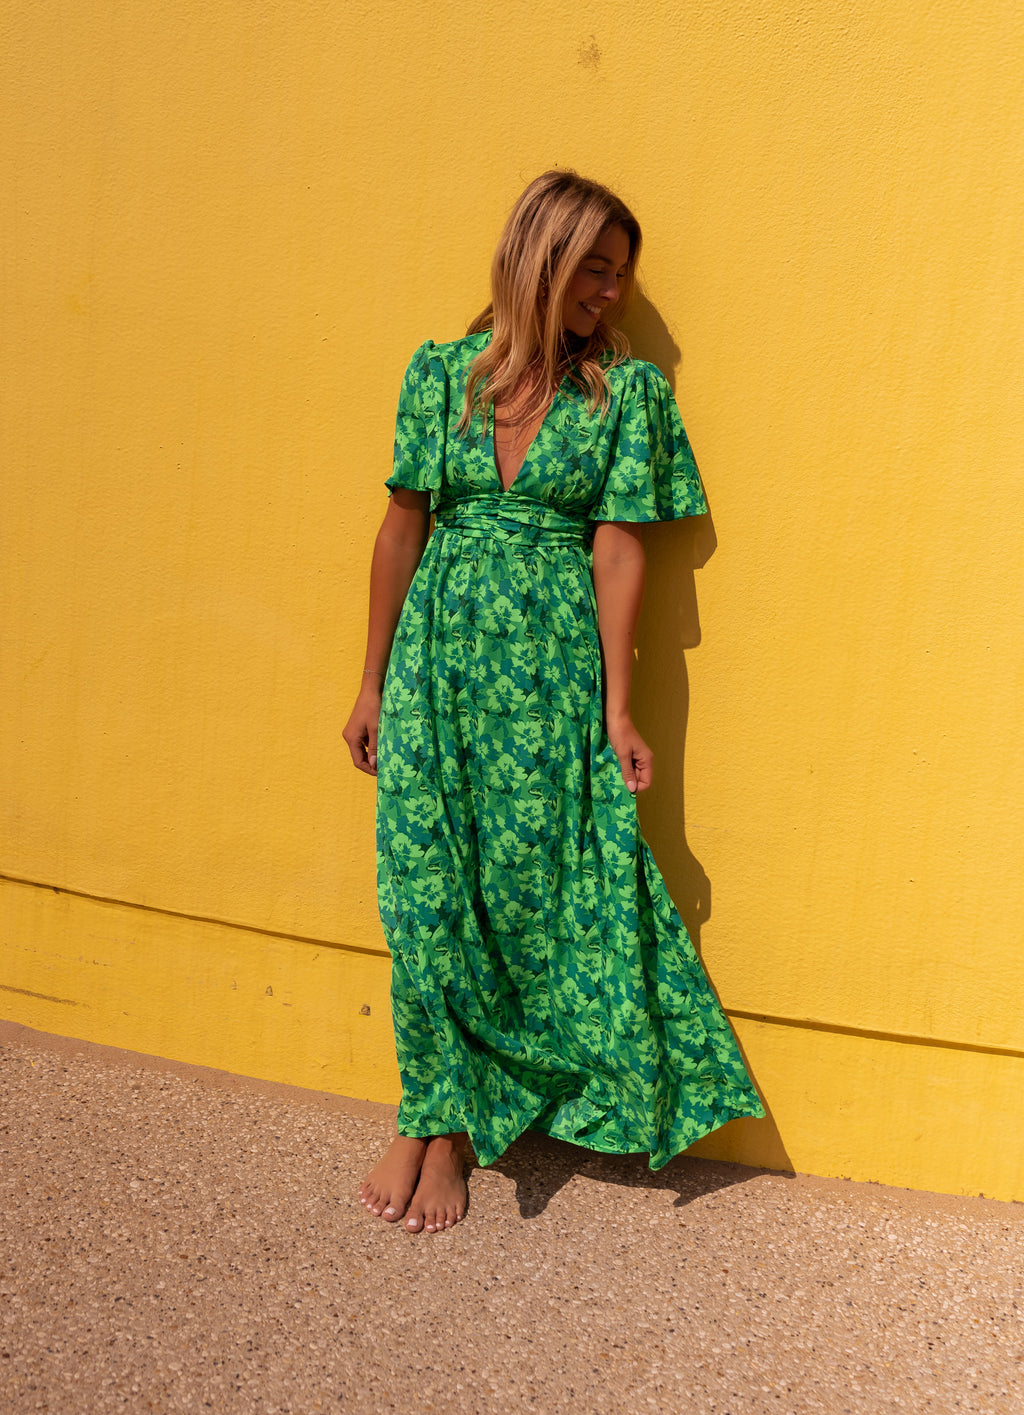 Dress Tiphaine - green patterned